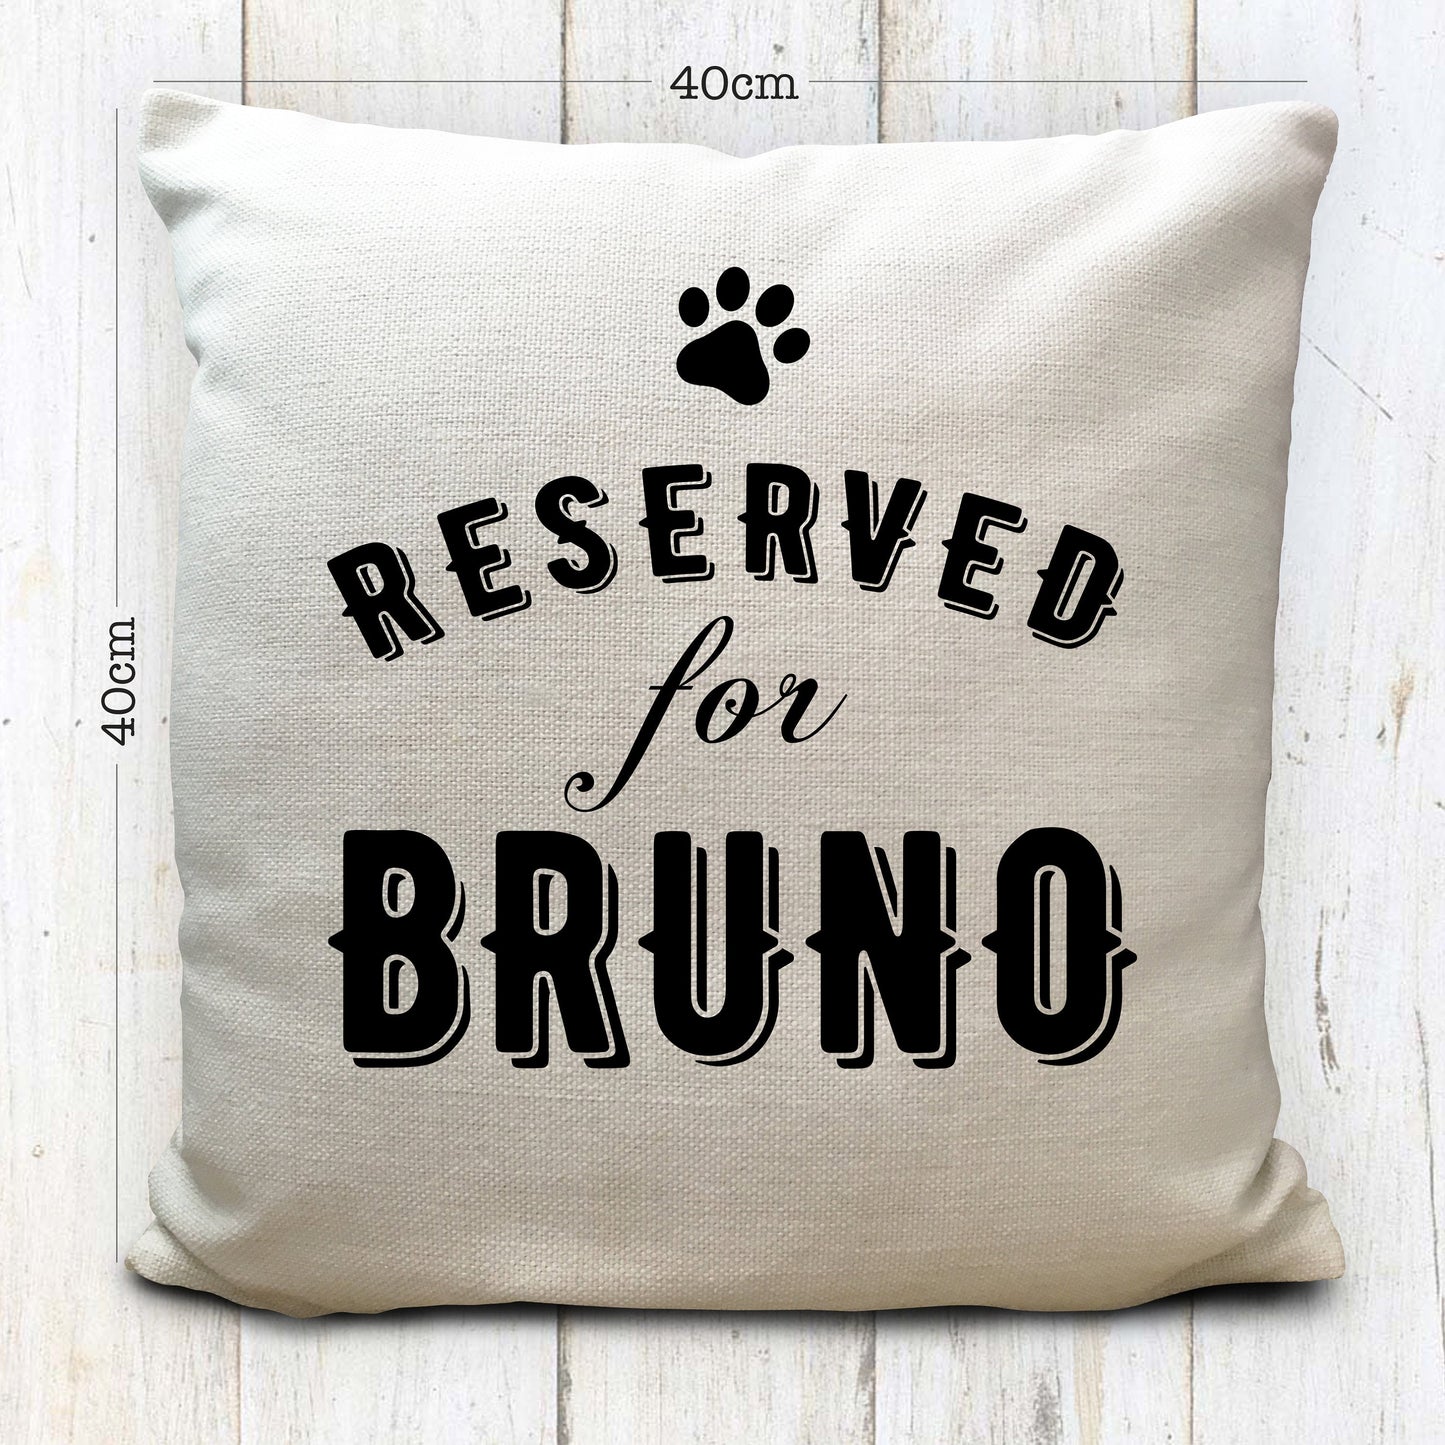 Personalised Pet Name Dog Bed Cushion Cover 40cm 16"